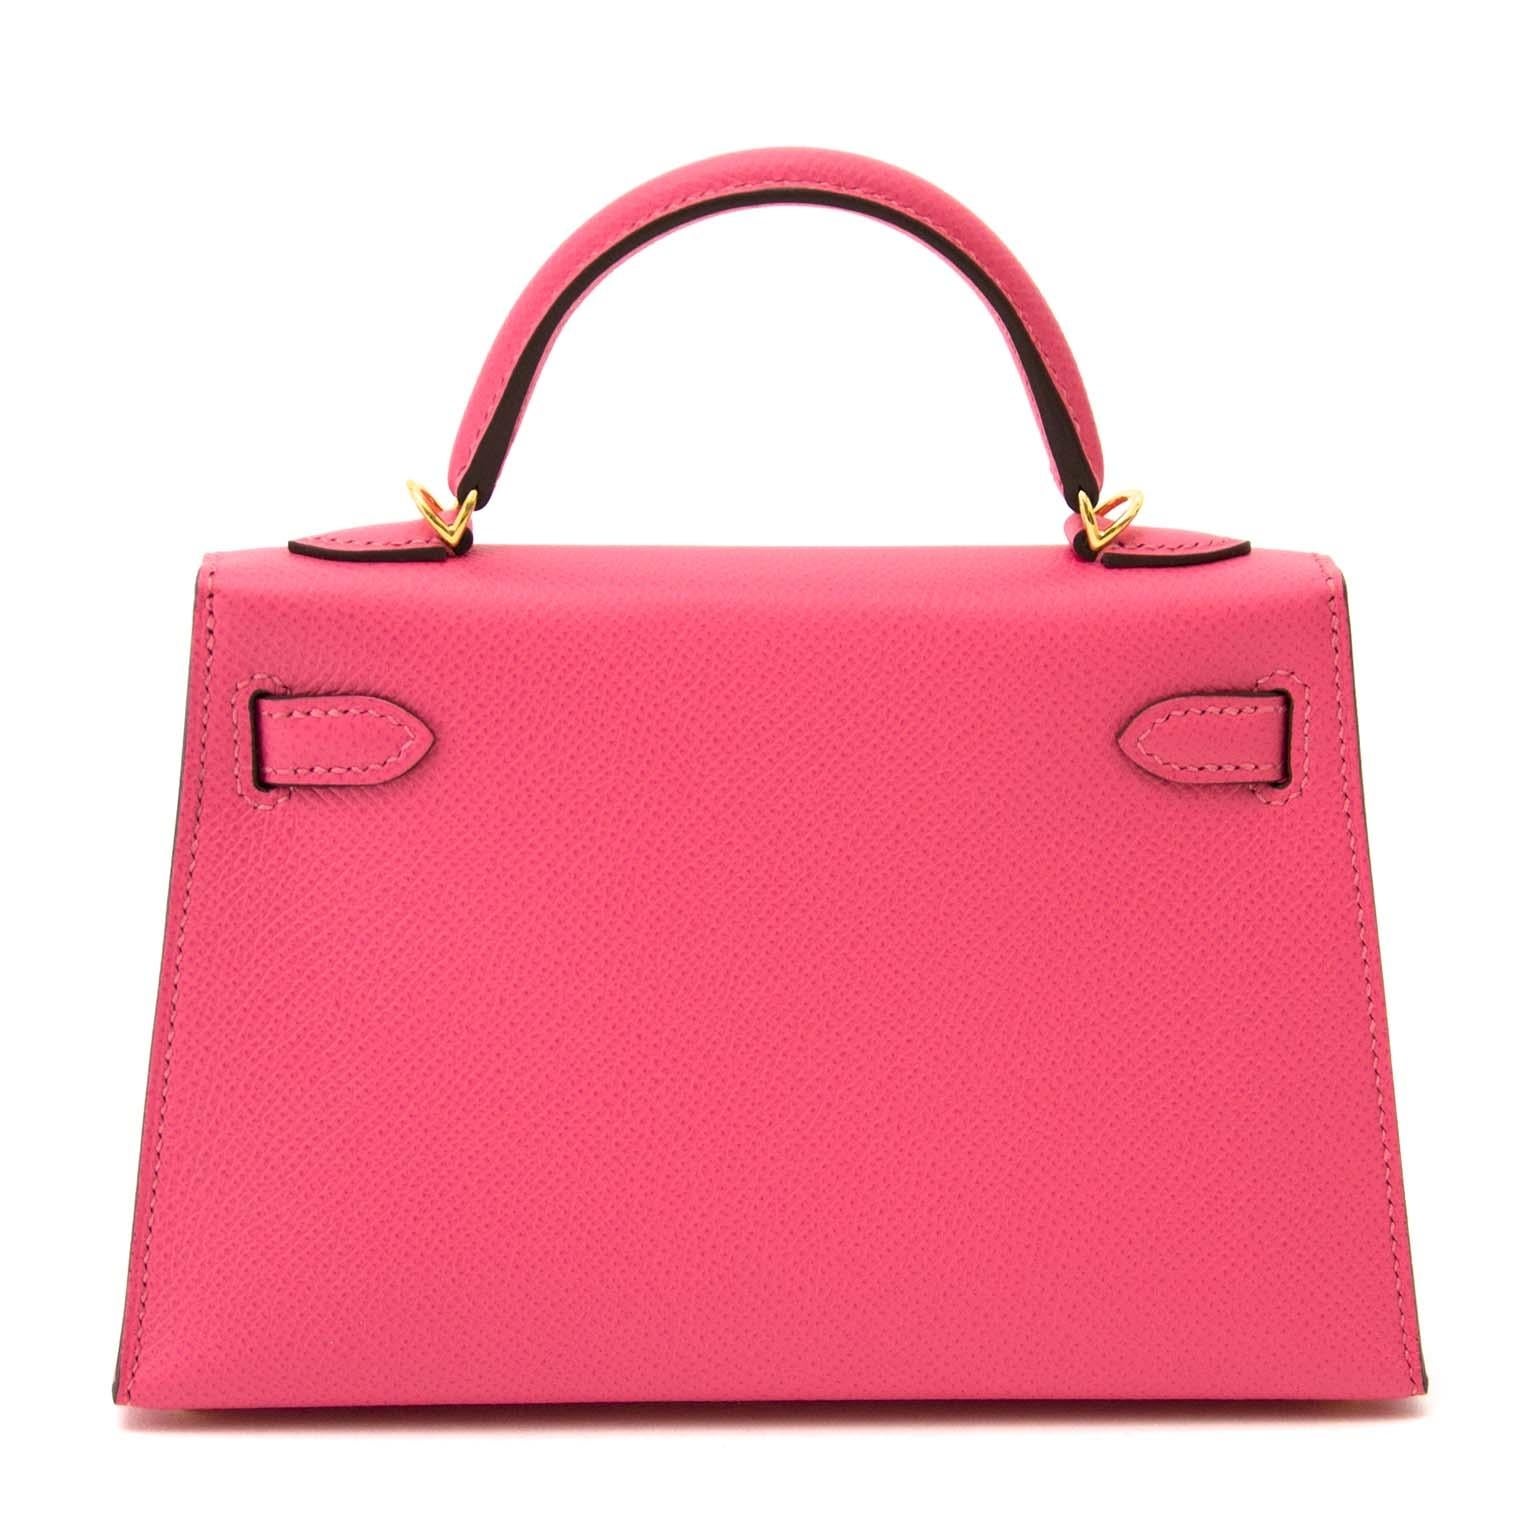 New and never worn

Hermès Kelly II Mini Veau Epsom Rose Azalee GHW

Rose azalee, one of the most perfect pink colors Hermès' ever made.

Hermès Kelly mini bags are adorable and almost impossible to get your hands on! Buy yours now at